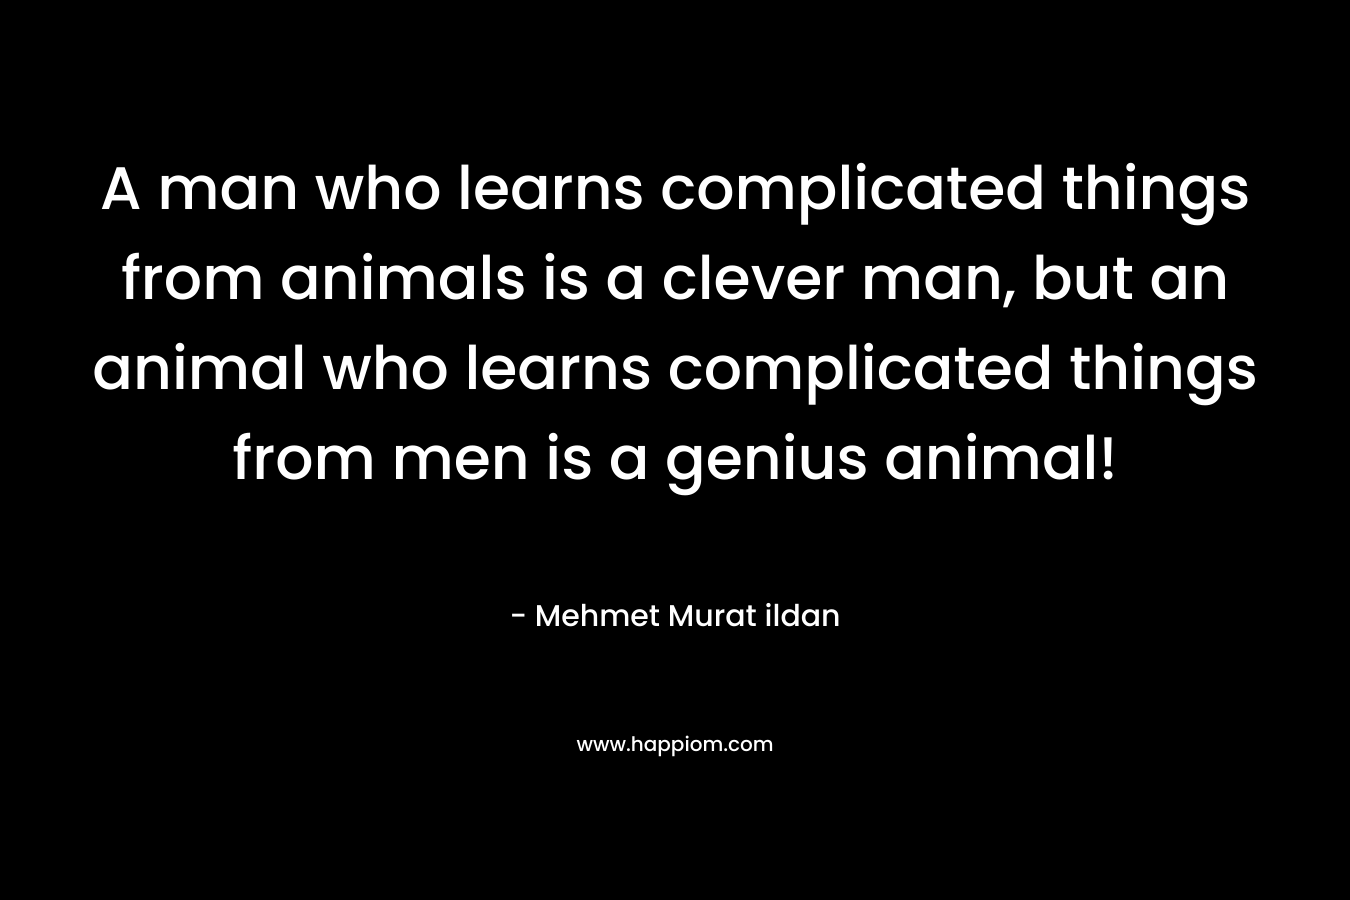 A man who learns complicated things from animals is a clever man, but an animal who learns complicated things from men is a genius animal!